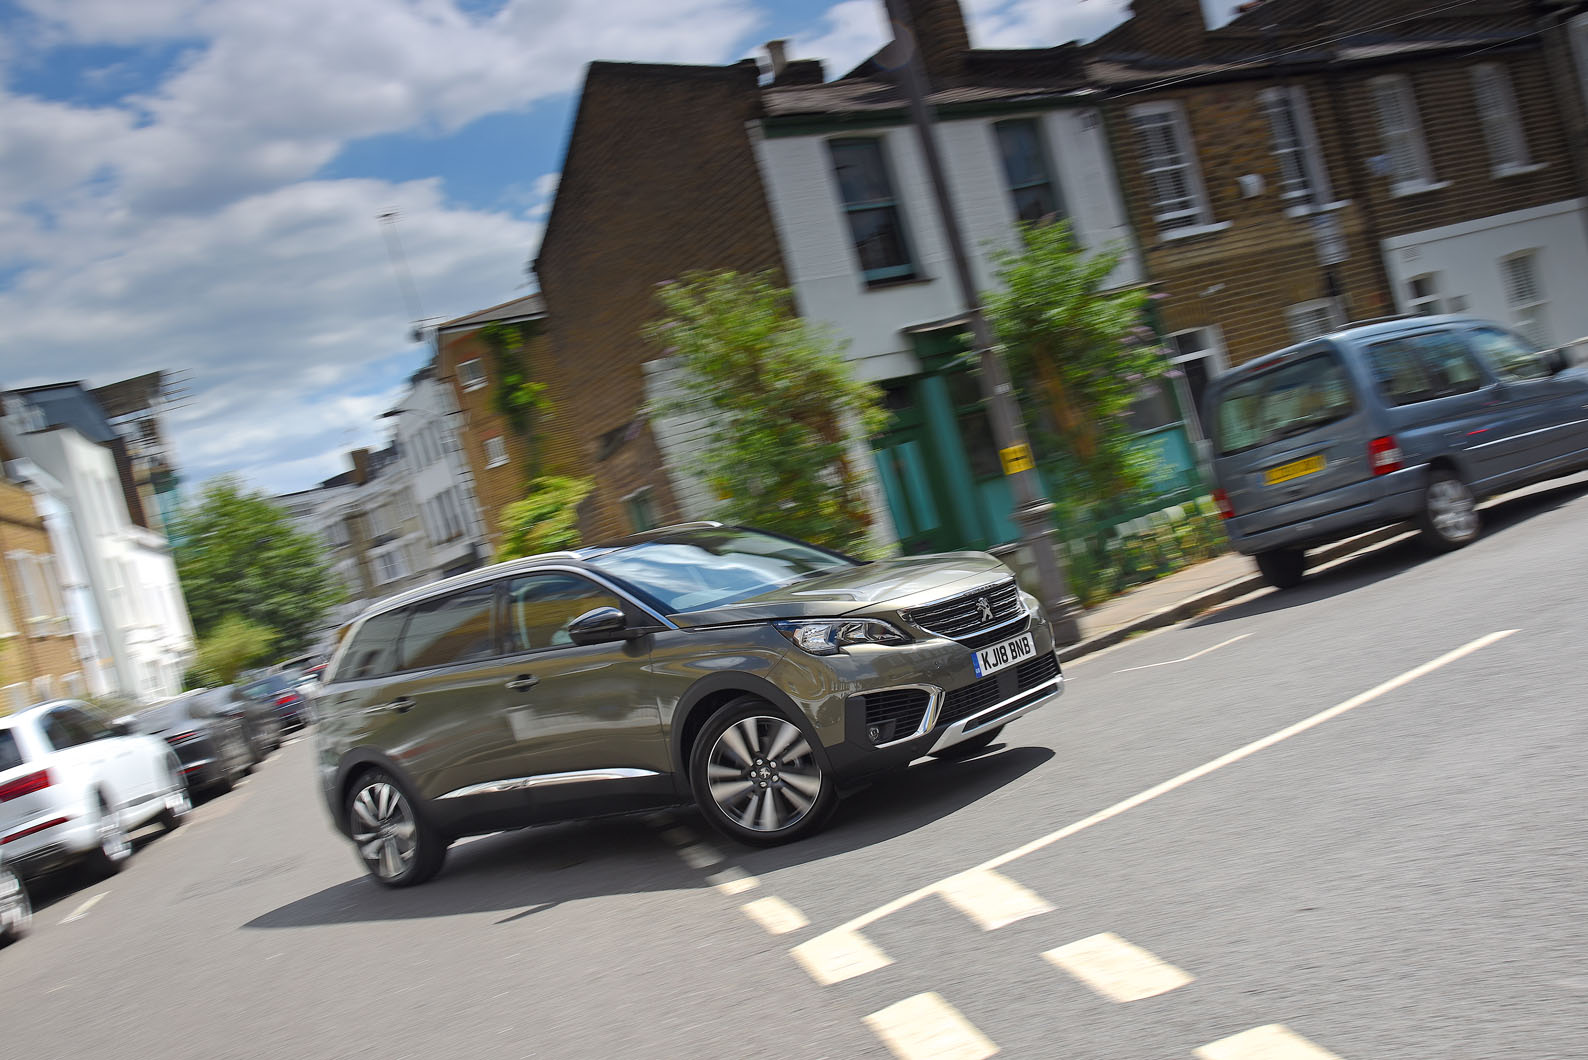 Peugeot 5008 long-term review: six months with a seven-seat MPV turned SUV